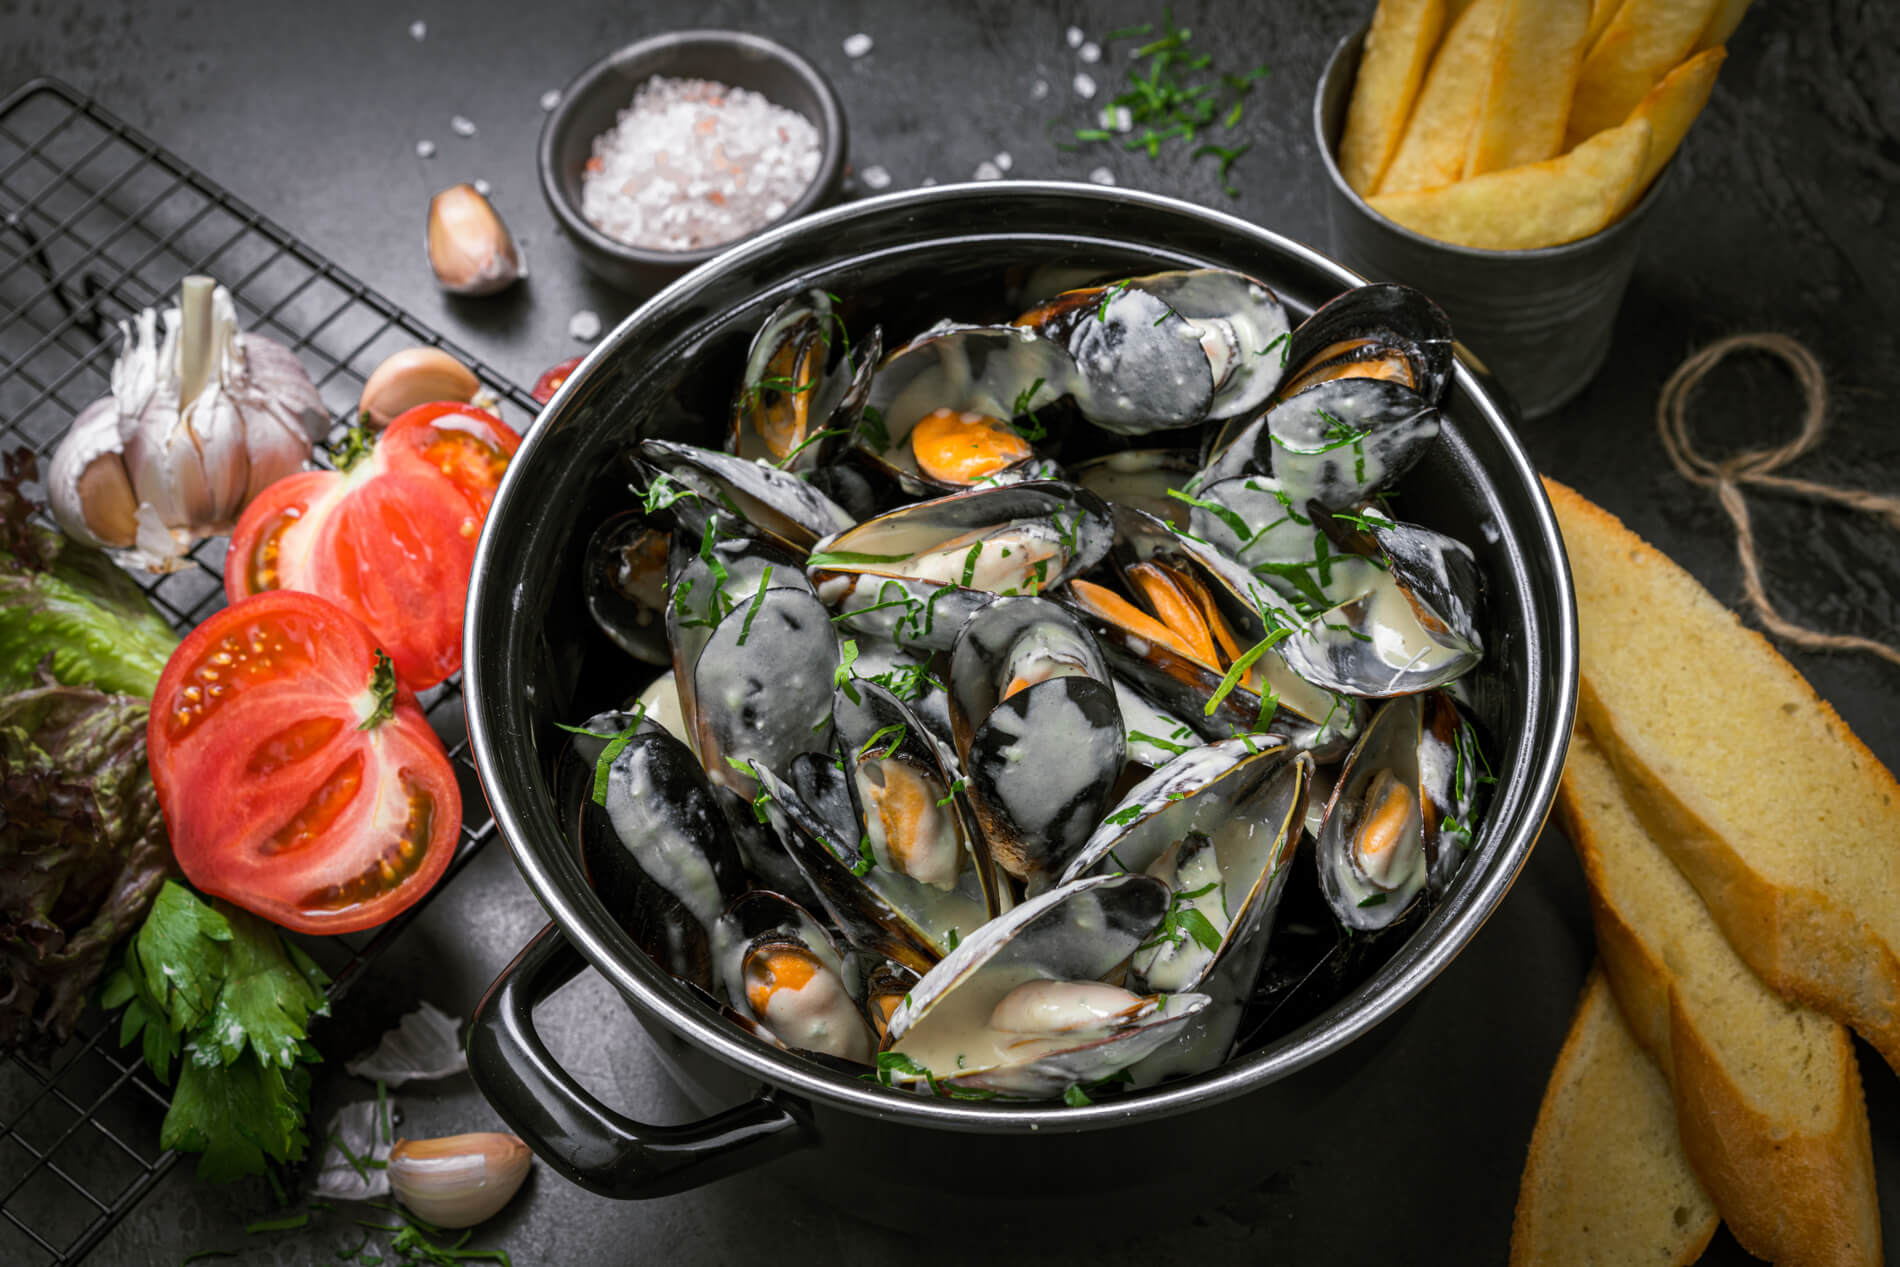 A kilogram of mussels for 800 rubles on weekends!